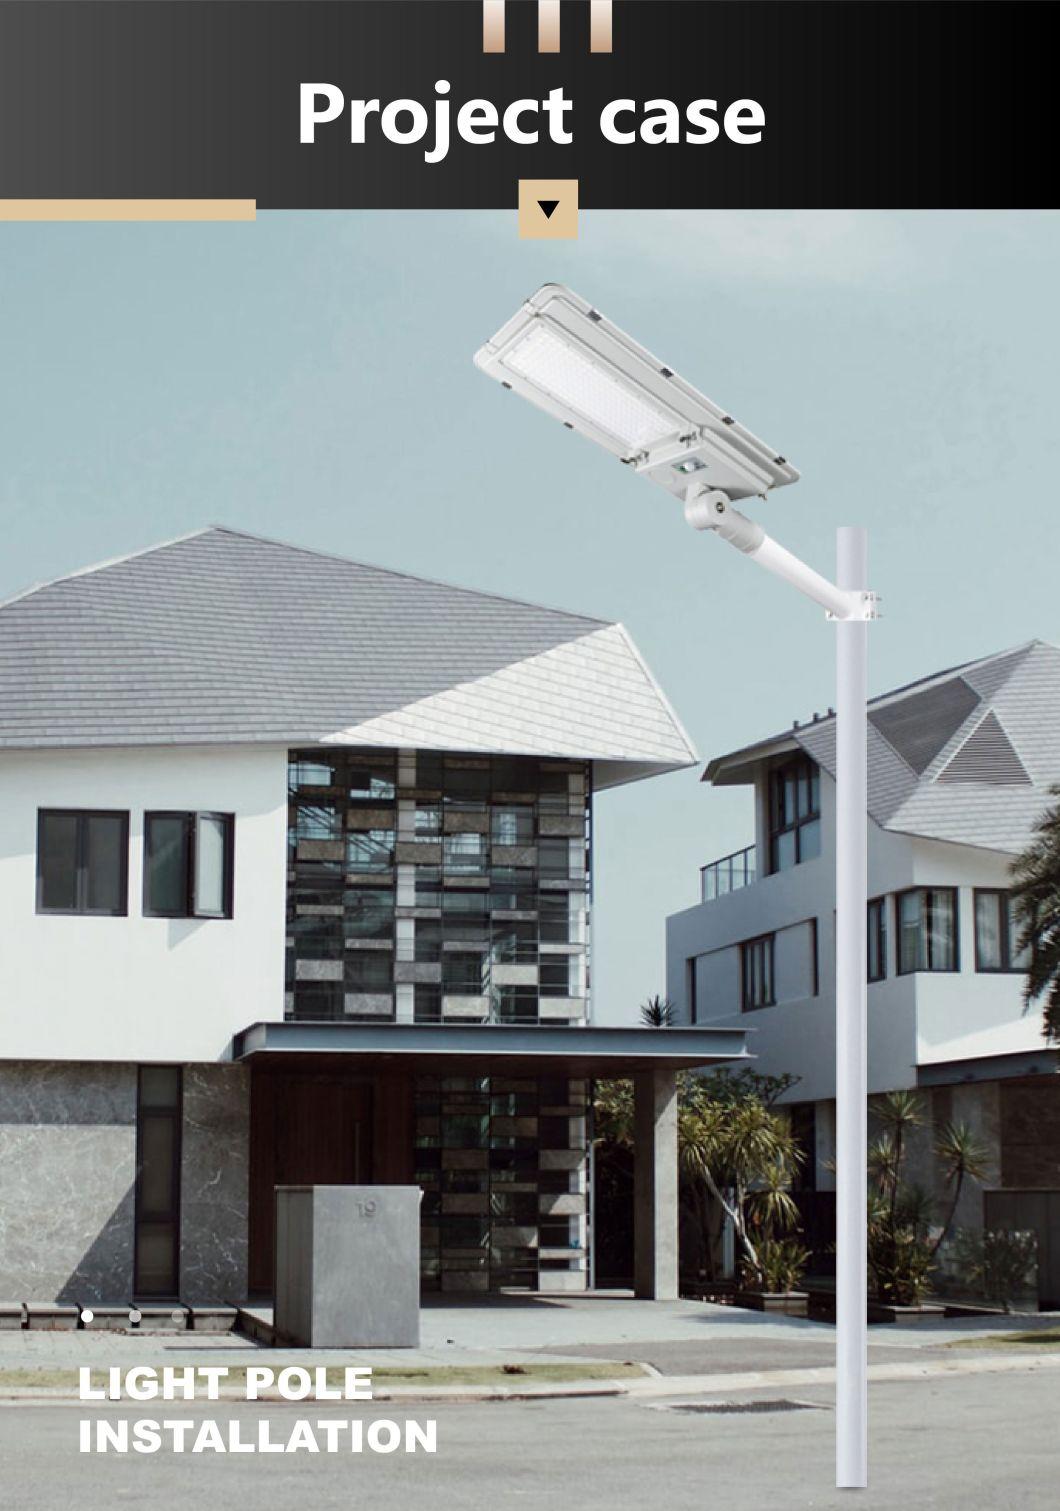 China Price IP67 Waterproof Remote Control Outdoor Road All in One LED Solar Street Light